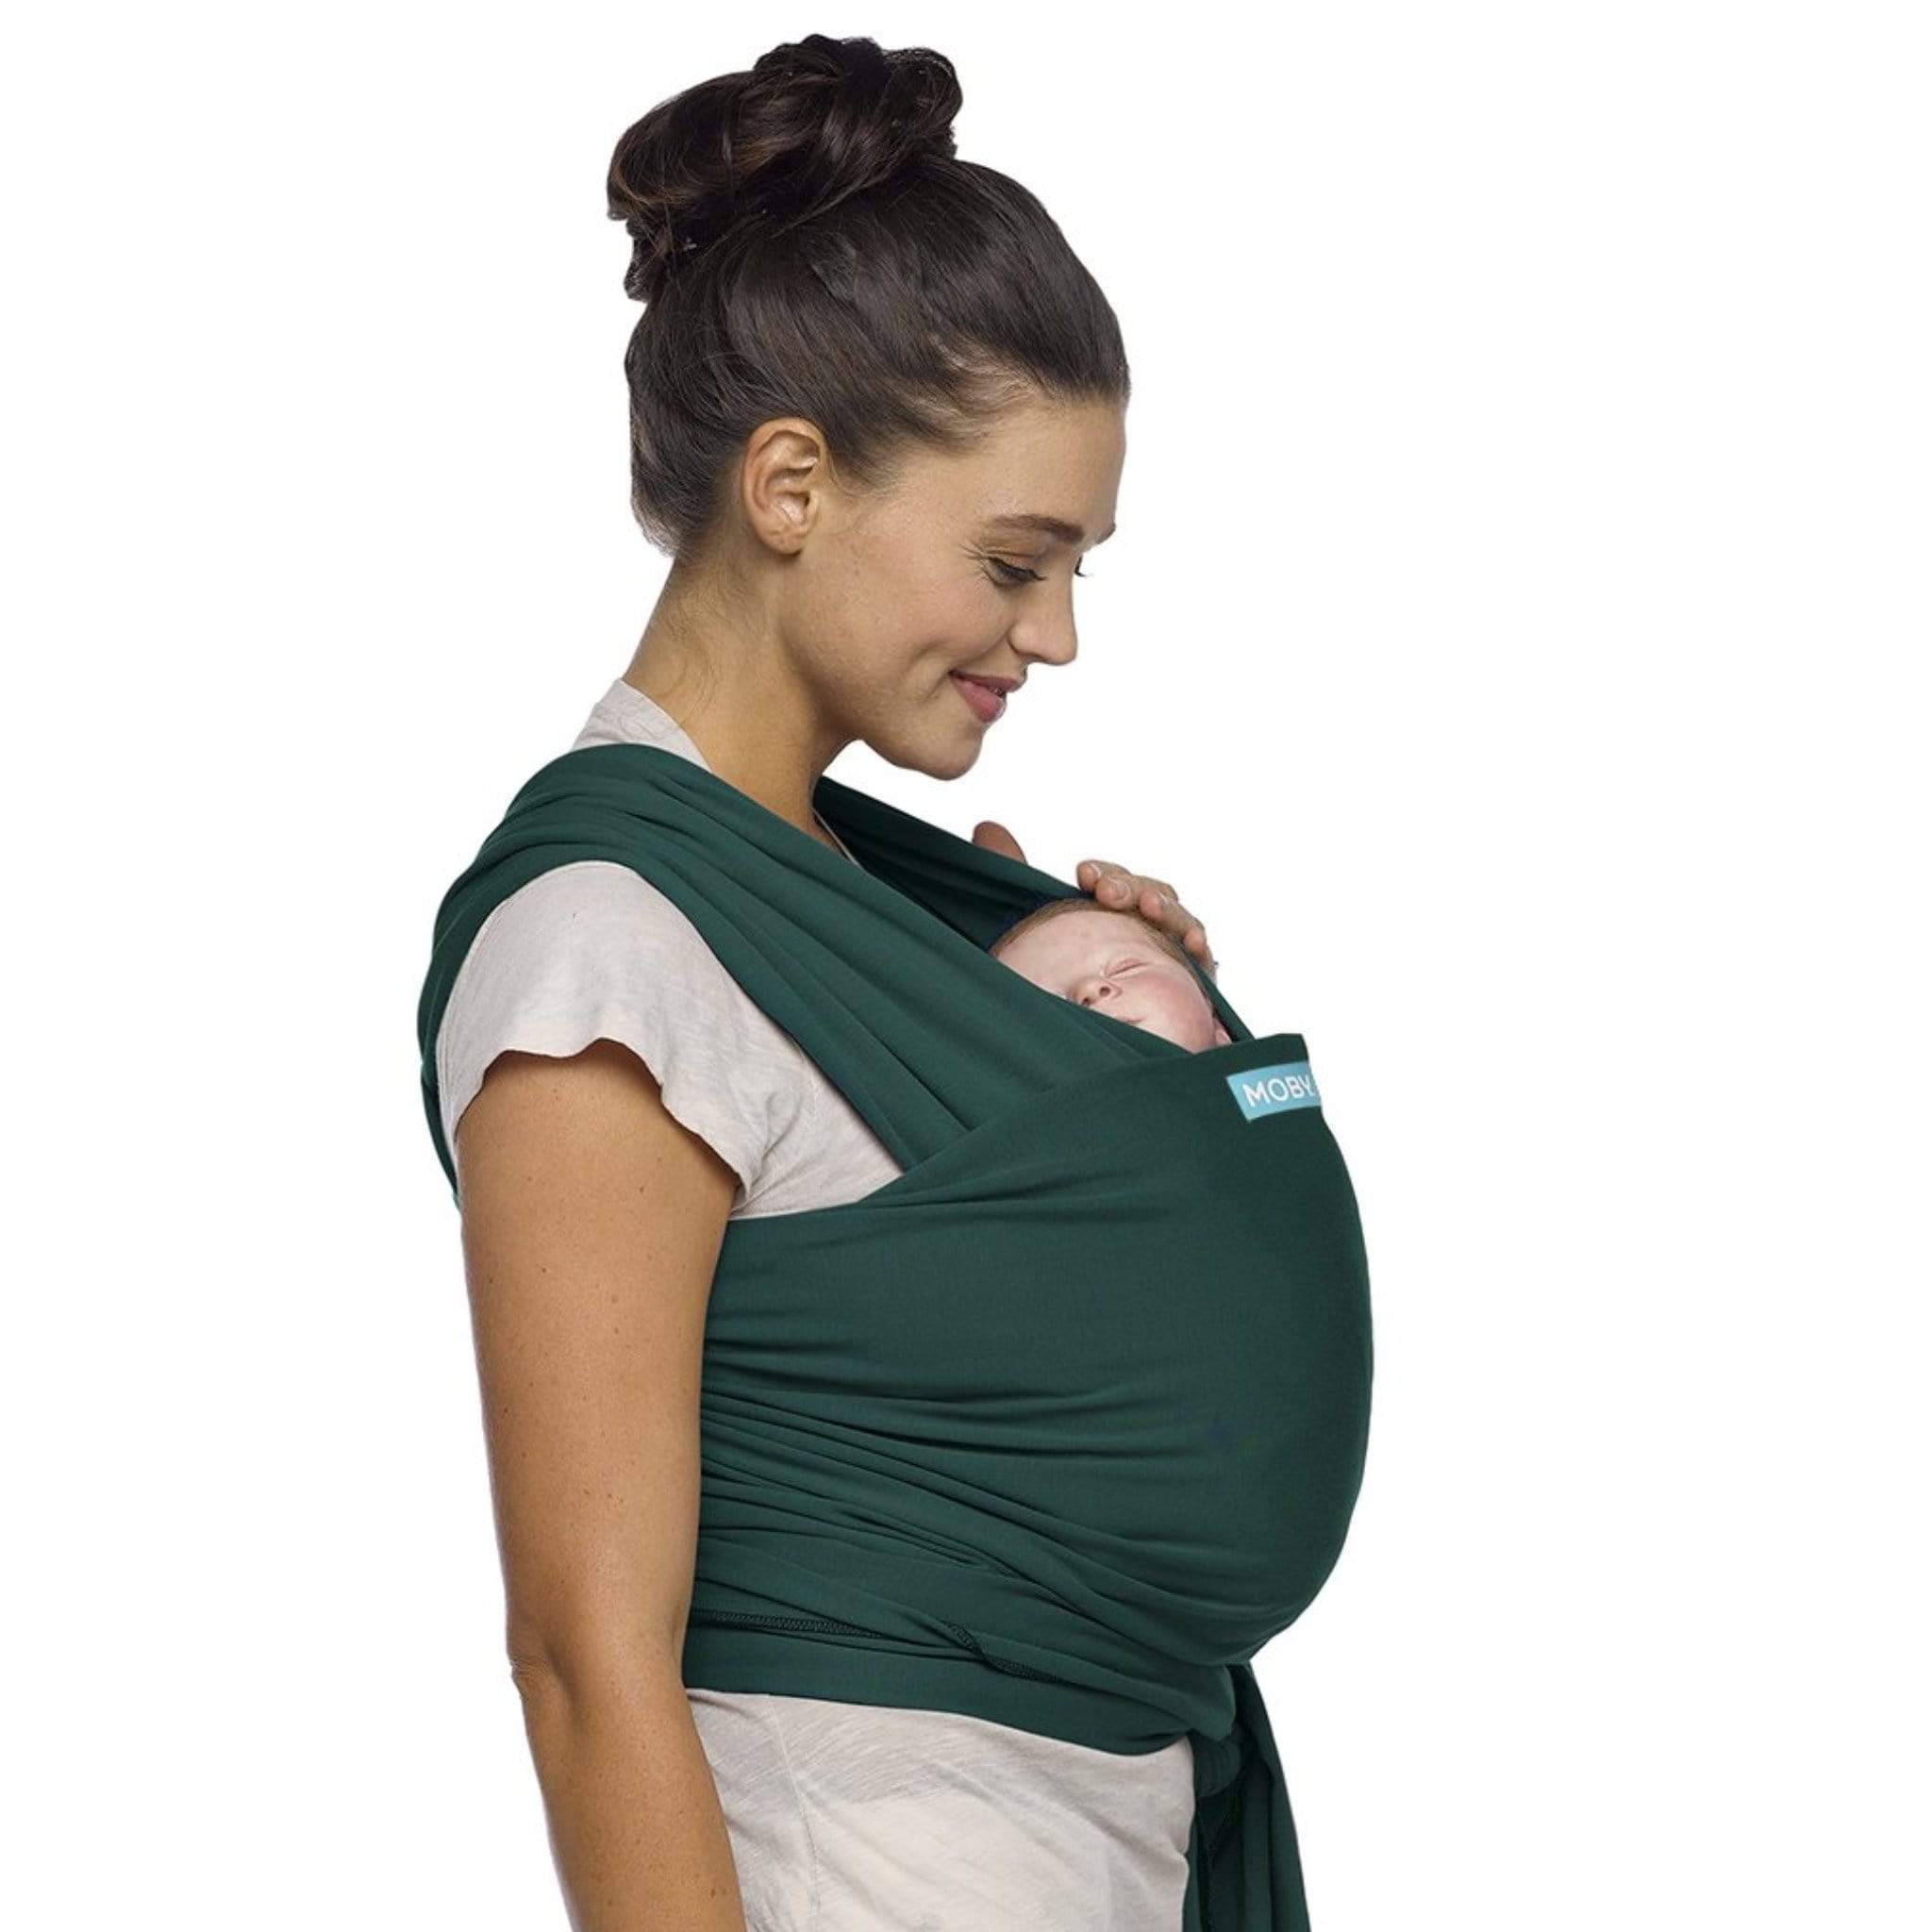 Moby Classic Wrap Pacific Baby Carriers MOB-MCL-PACIFI 843390005794